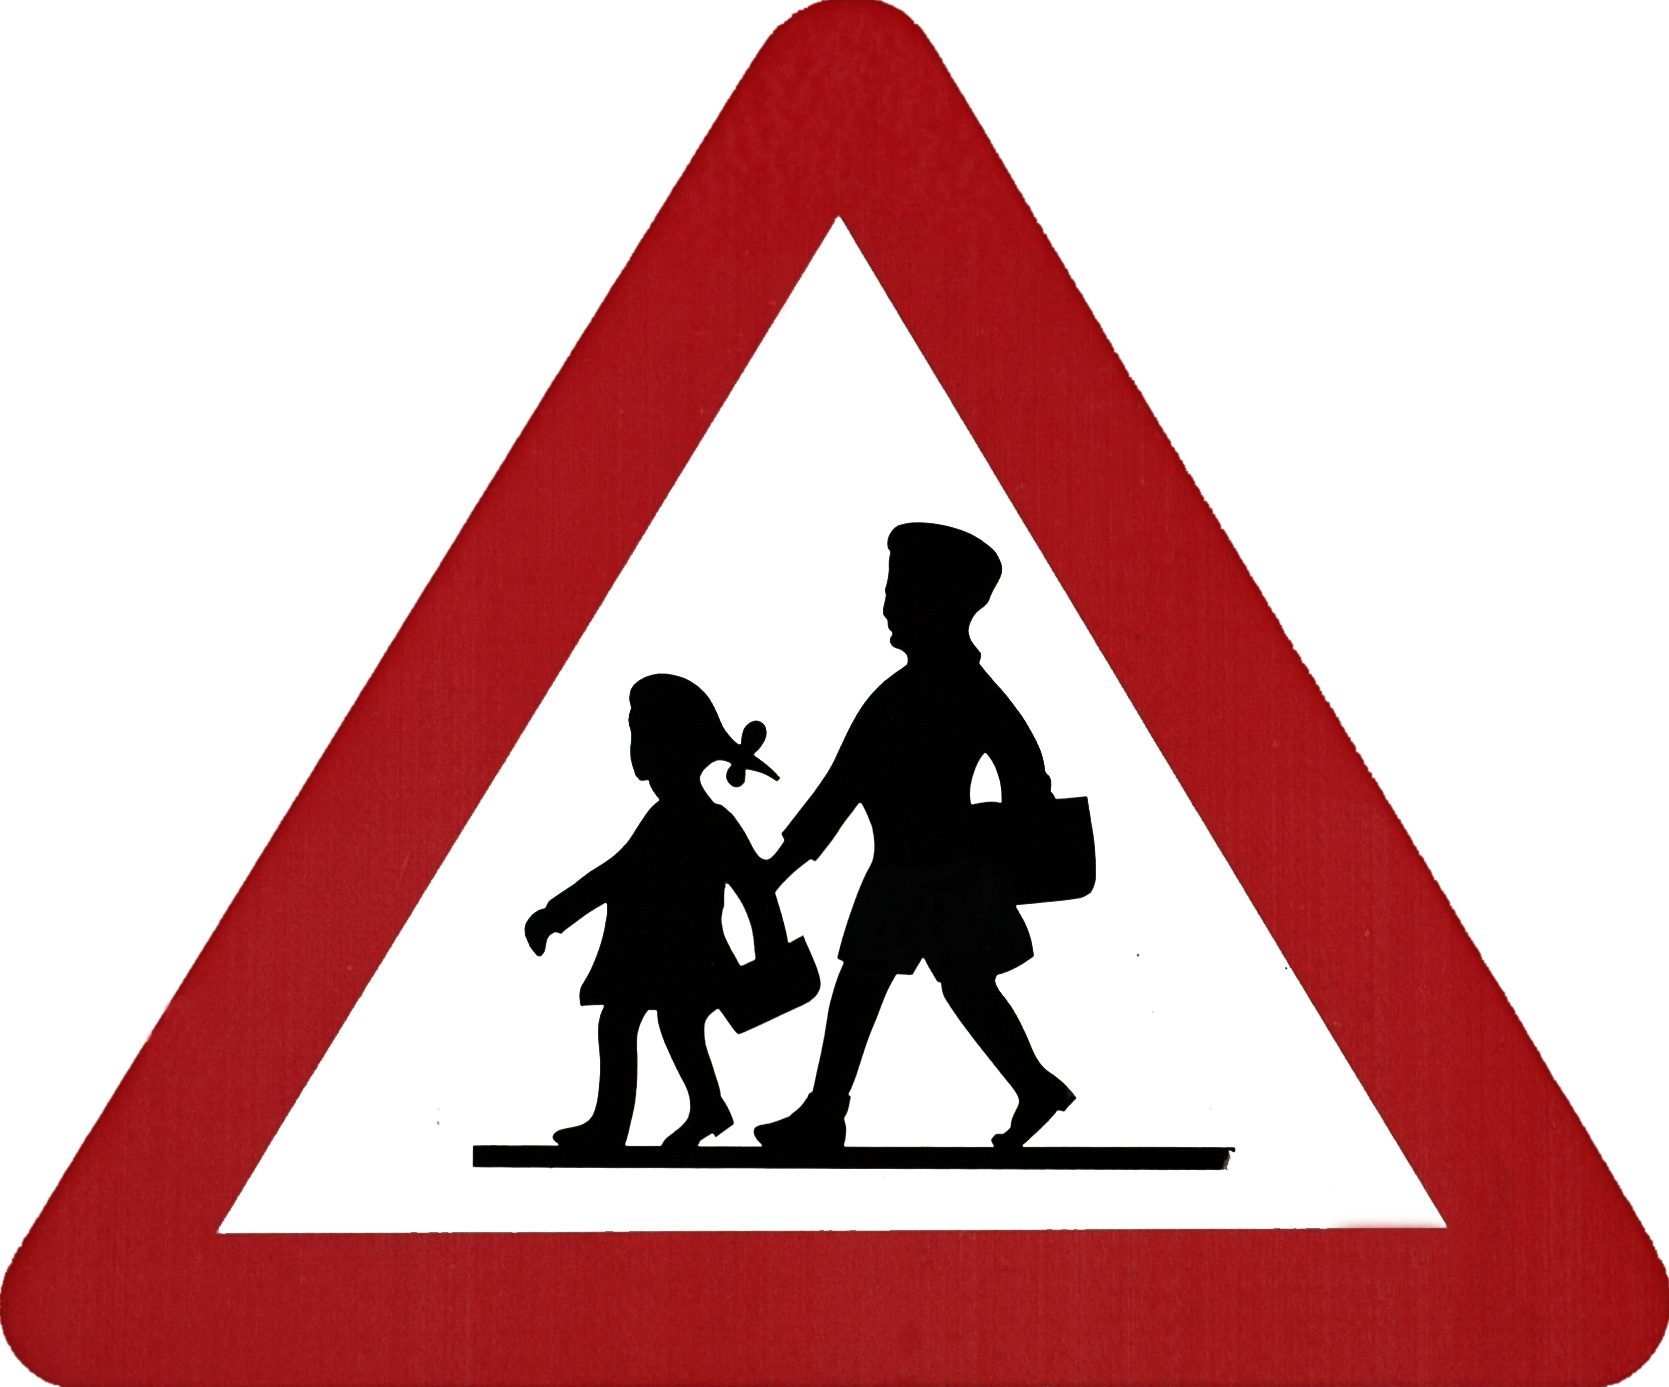 Child Crossing Sign - ClipArt Best